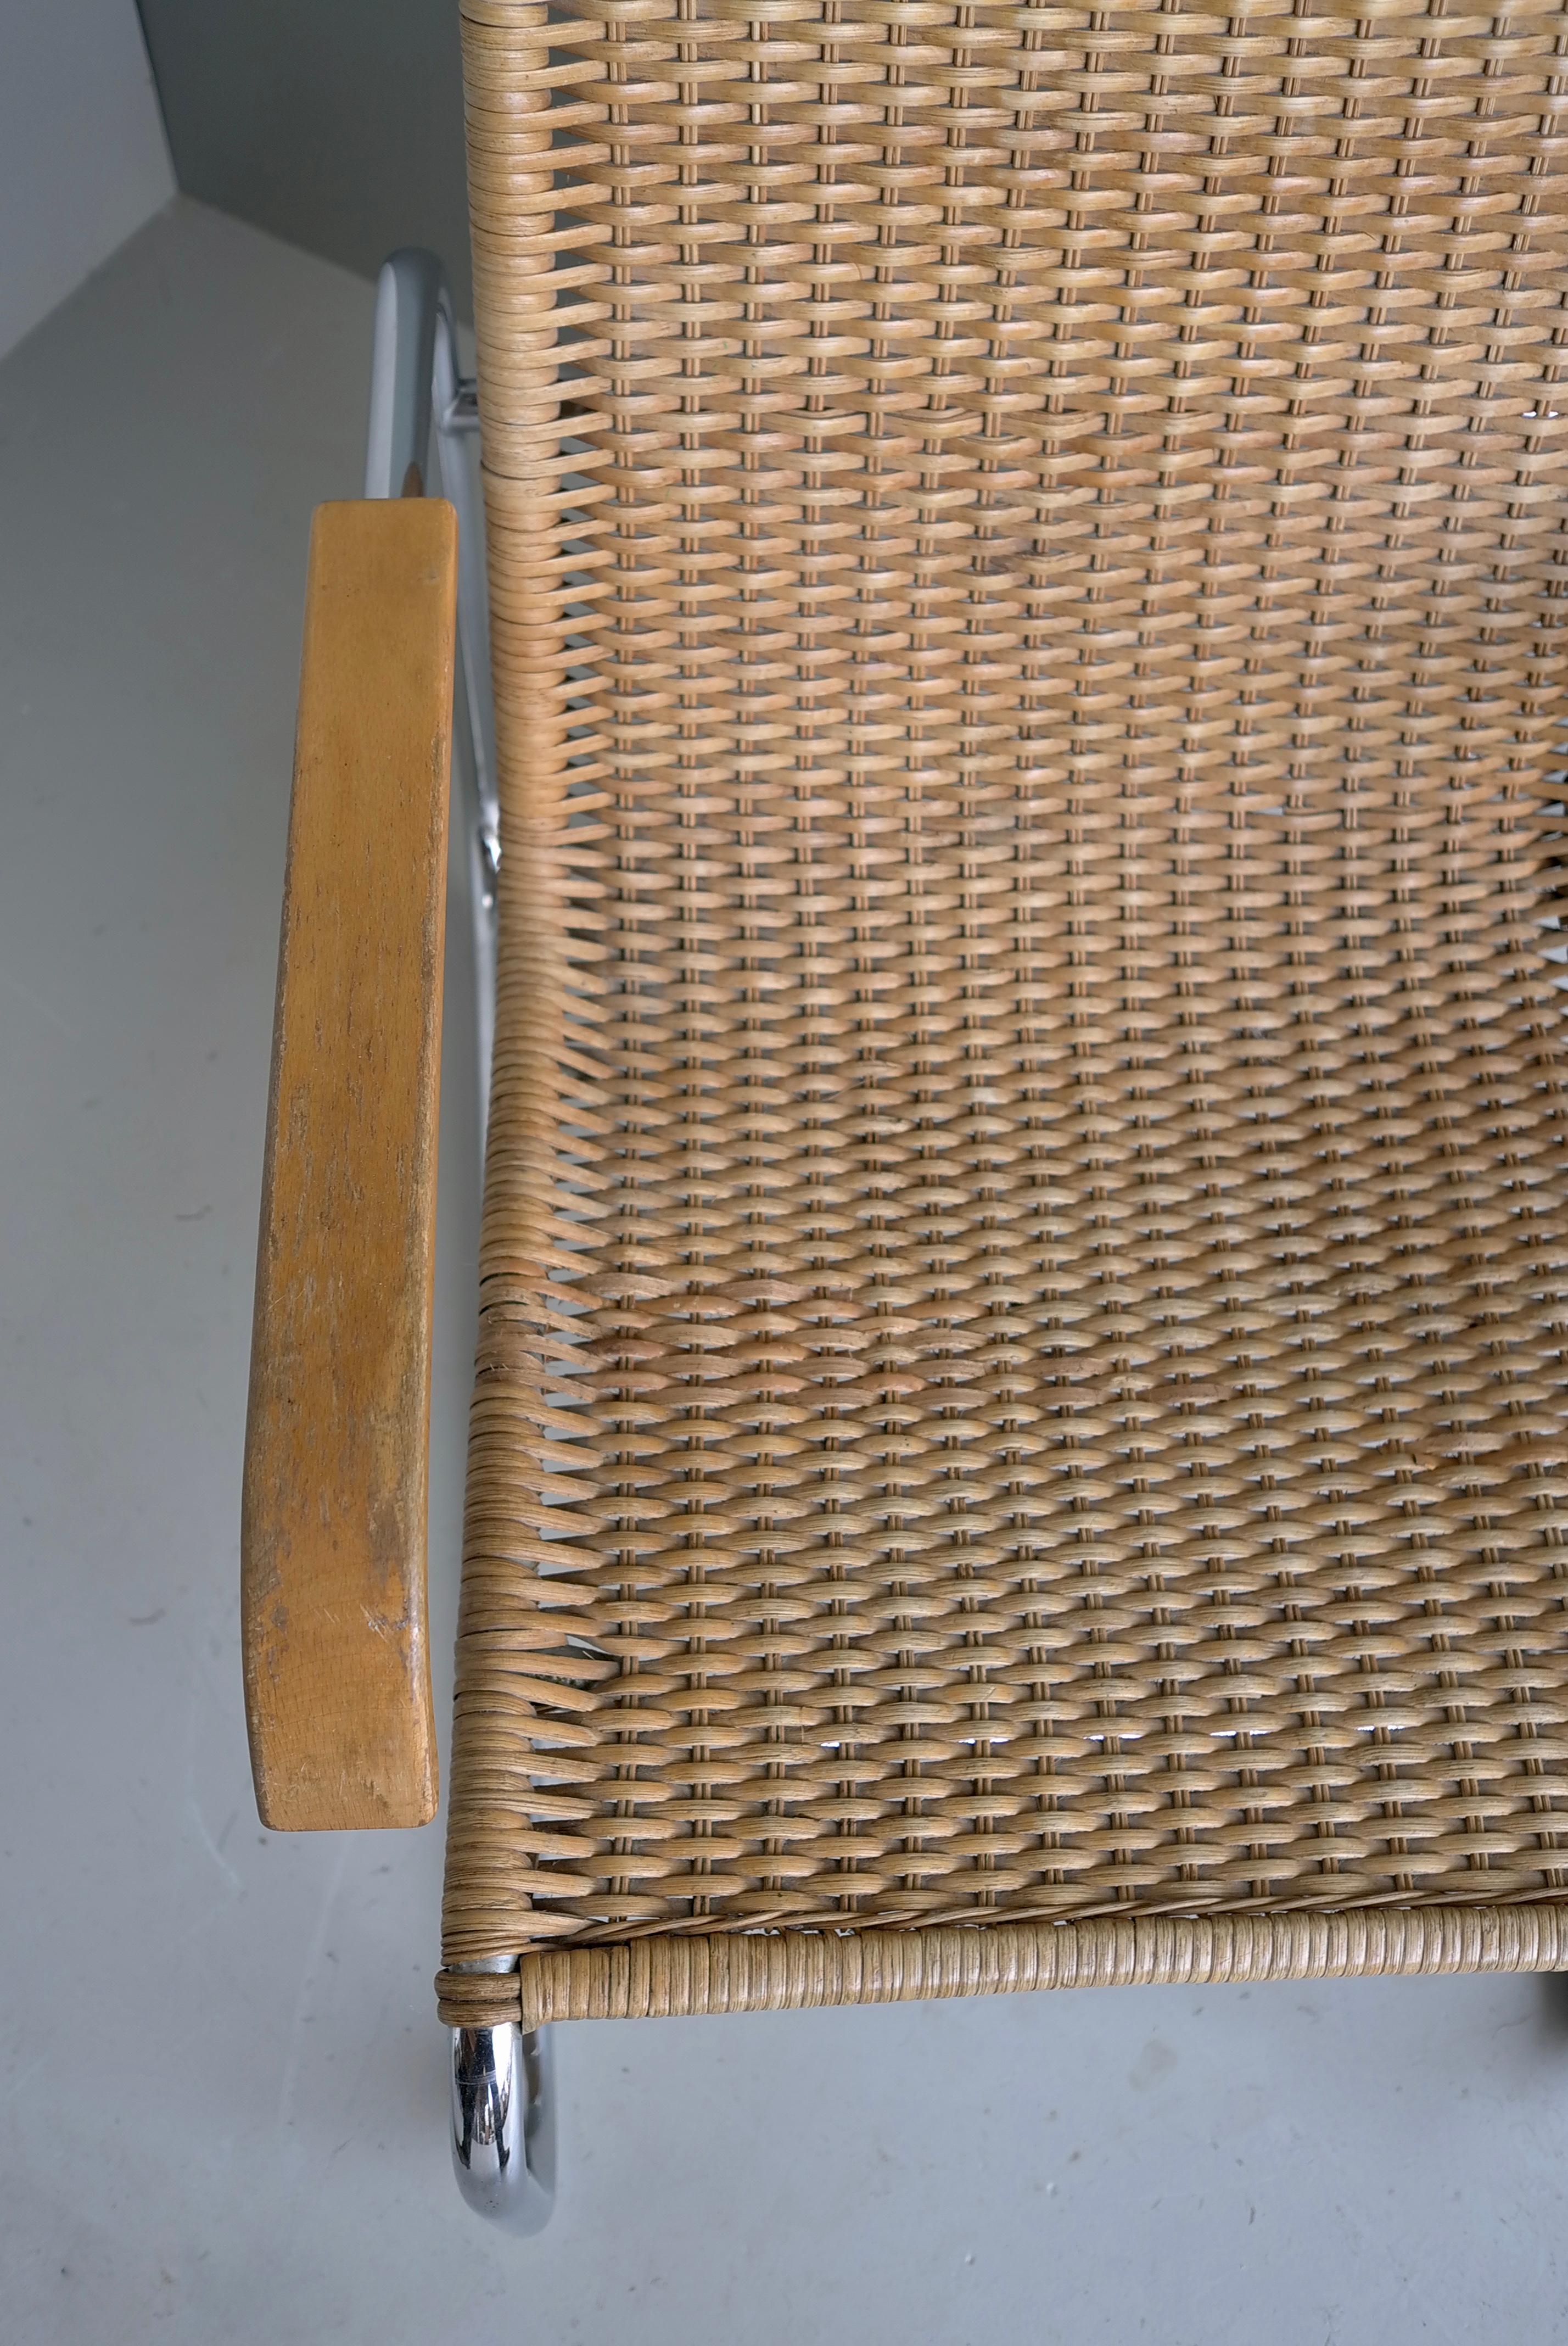 Marcel Breuer B35 Wicker and Chrome Armchair by Thonet 1960's For Sale 1